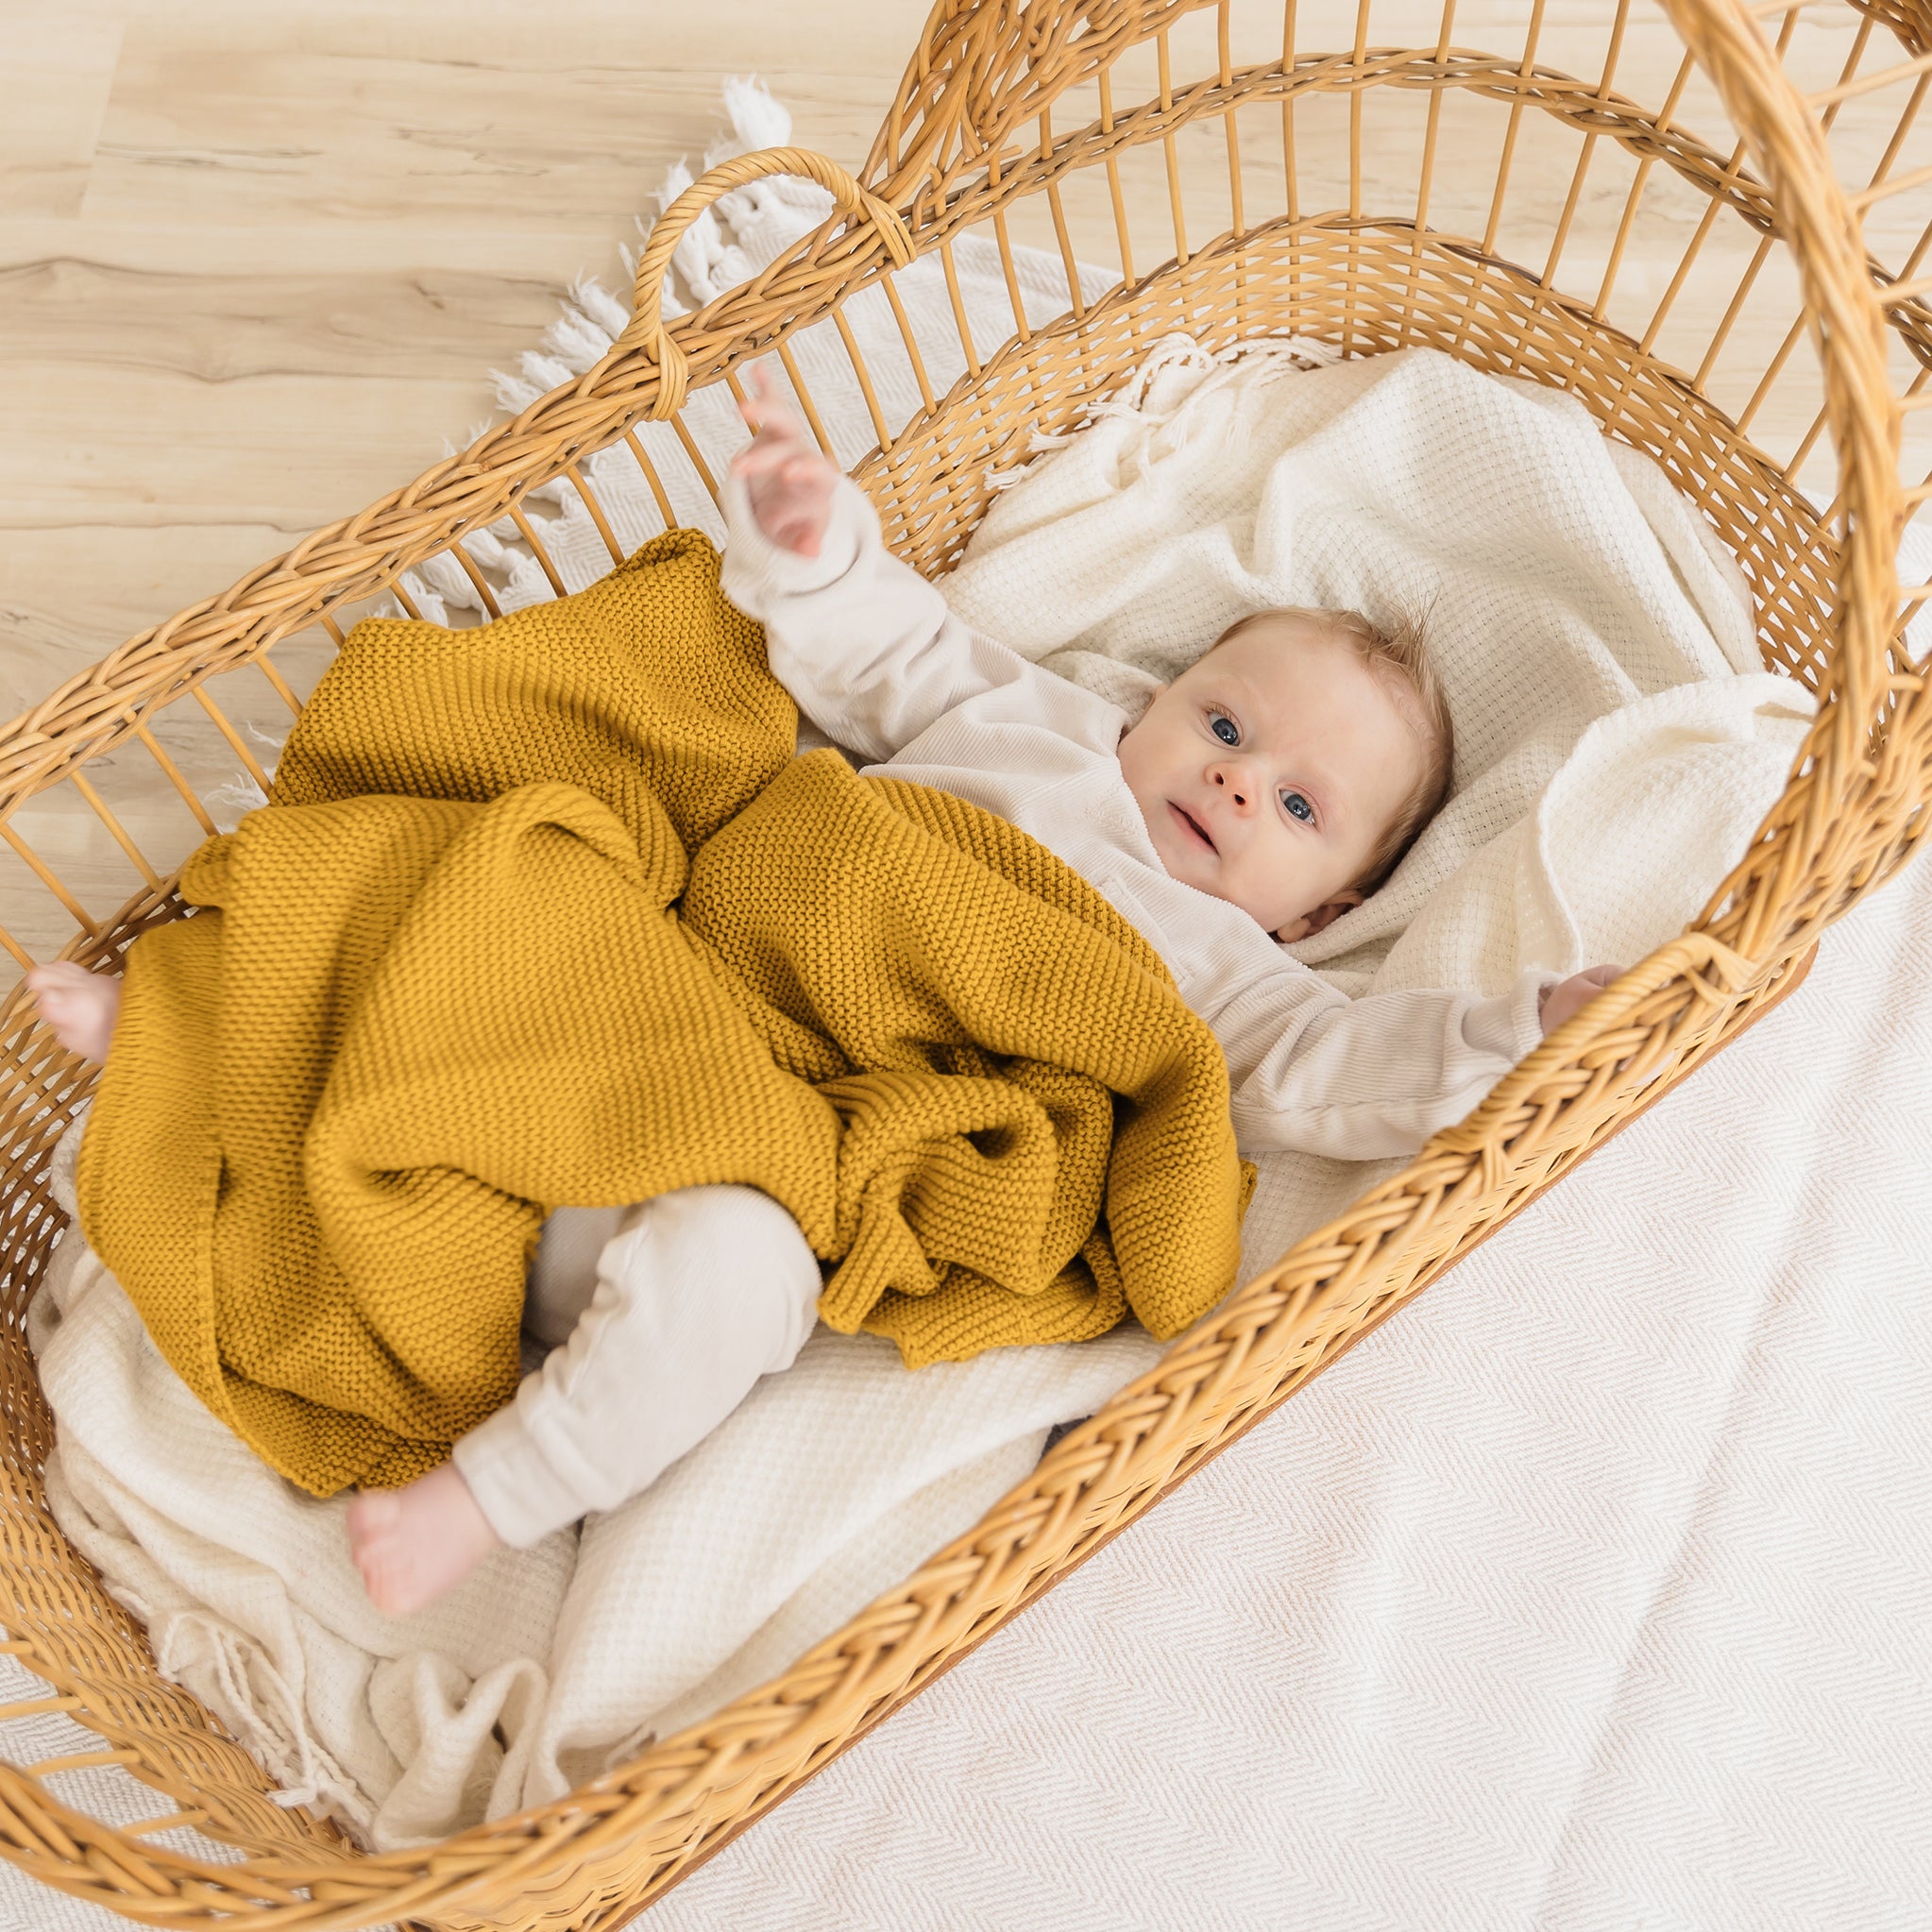 Knitted Baby Blanket in Harvest Gold - Natemia